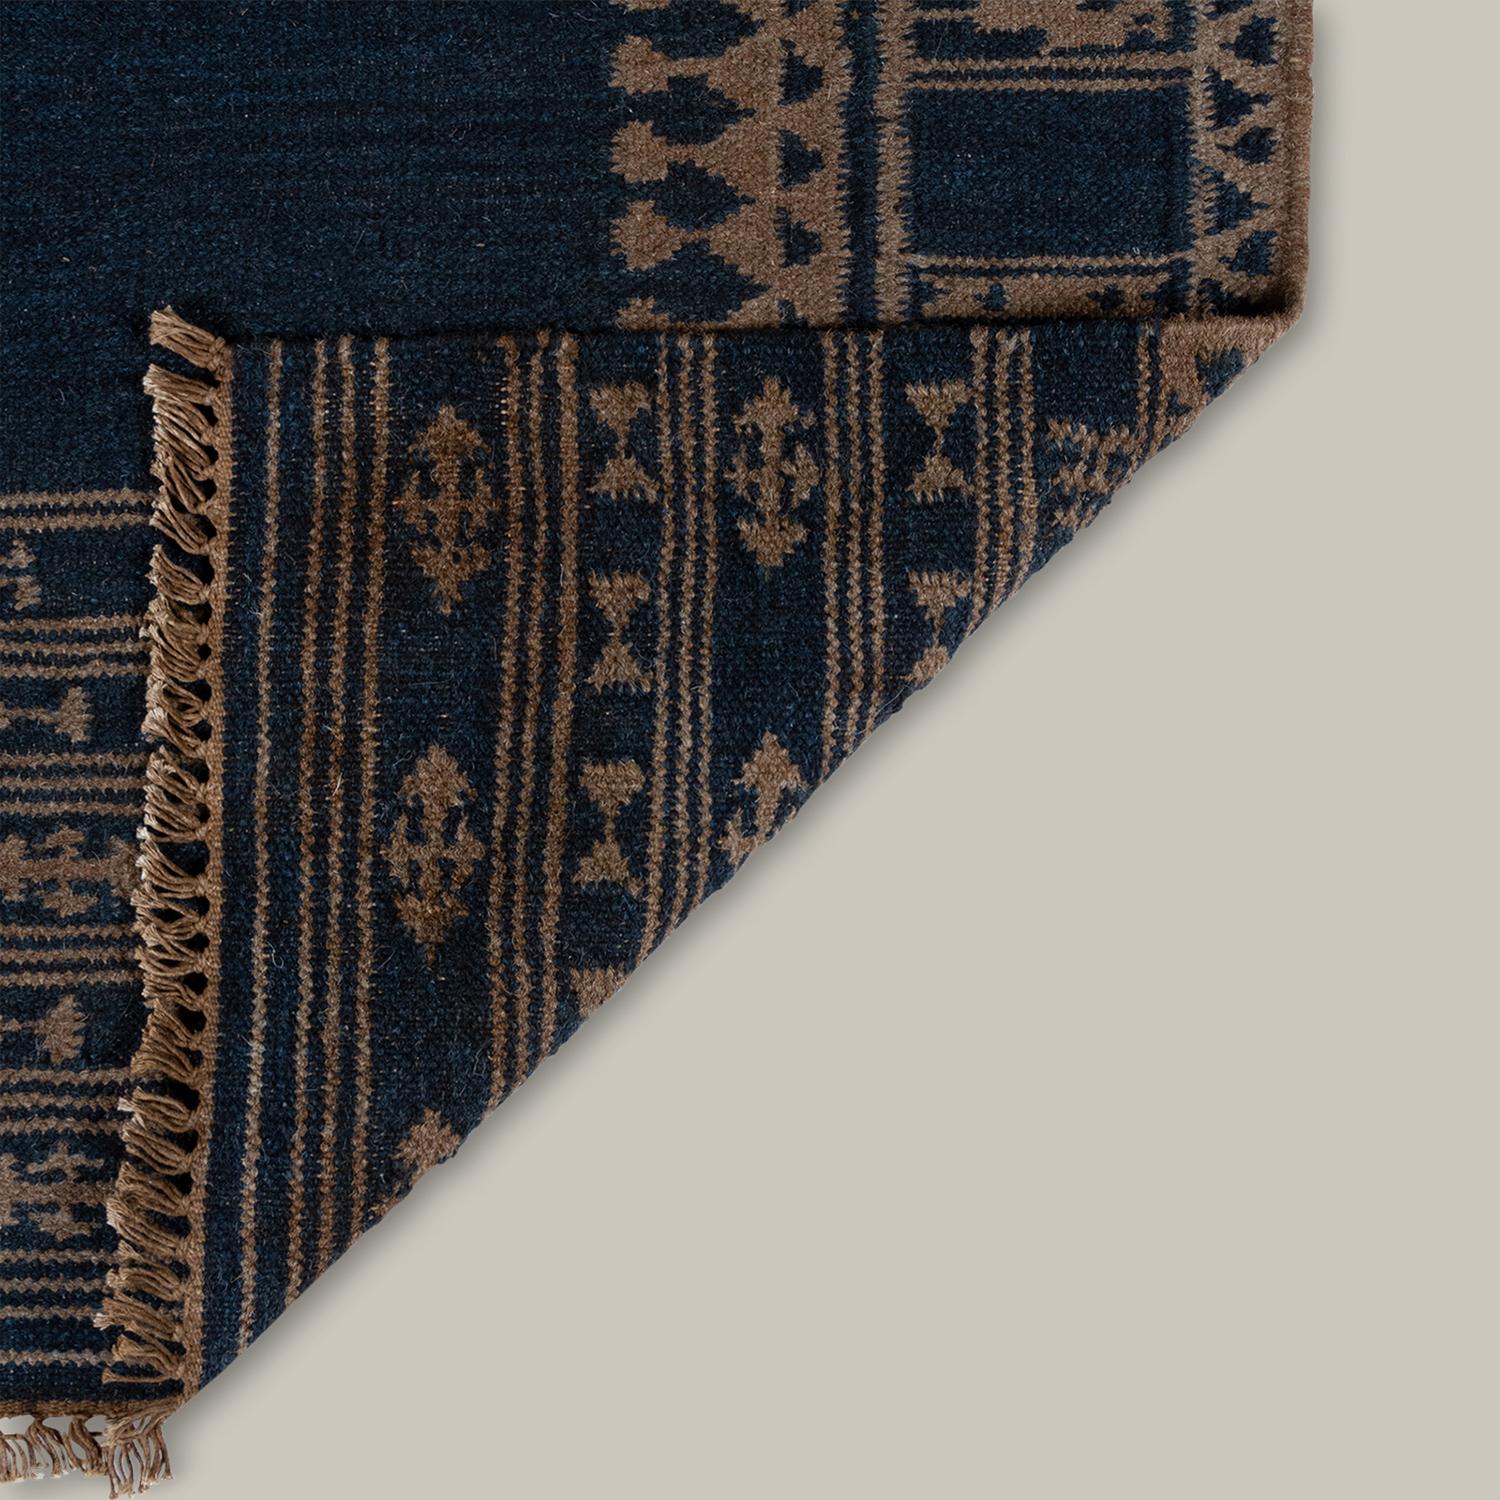 “Duar Kaba” Scandinavian Flatweave-Inspired Rug 'Indigo' by Christiane Lemieux In New Condition For Sale In New York, NY